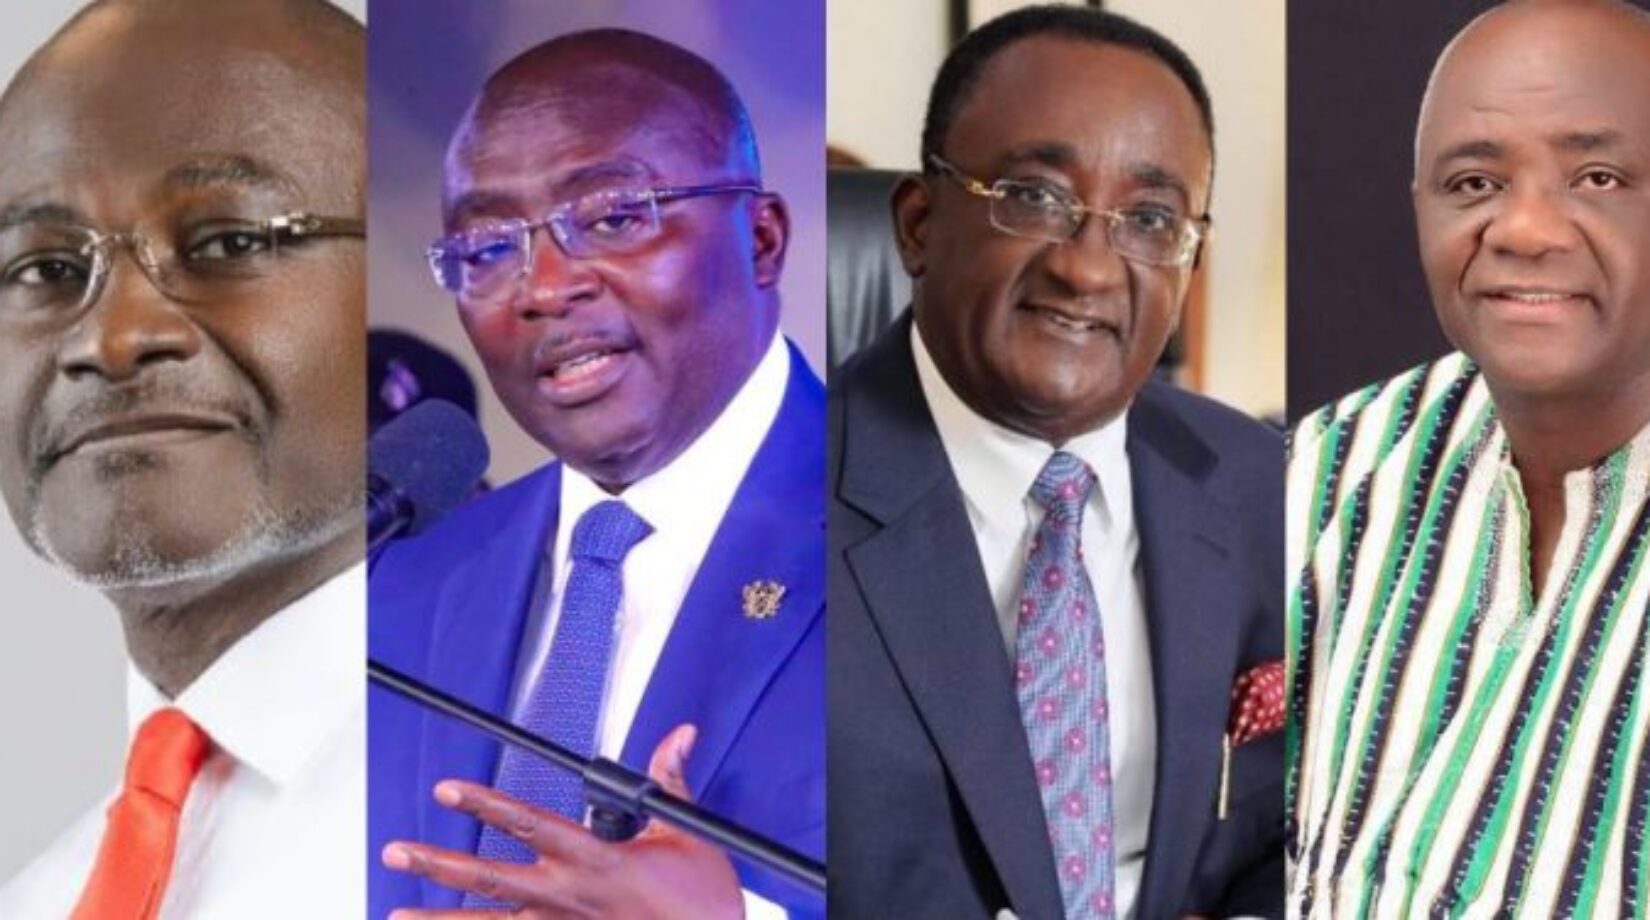 NPP extends deadline for submission of proxy application for Nov. 4 Presidential Primaries